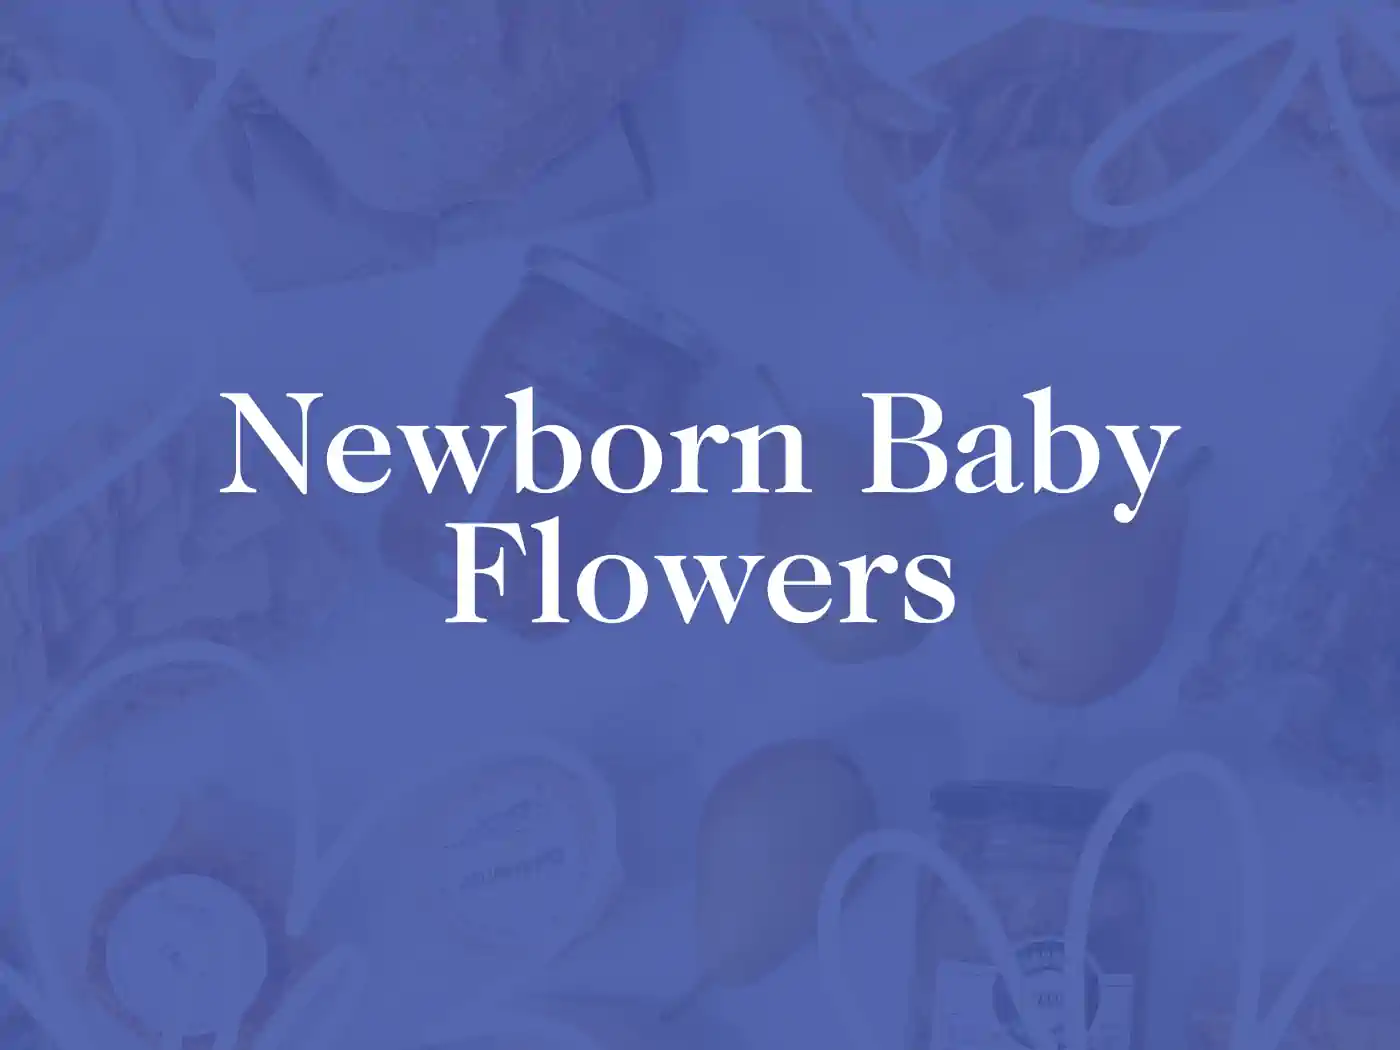 New Baby Flowers Collection - Fabulous Flowers and Gifts. New Baby Flowers British English.